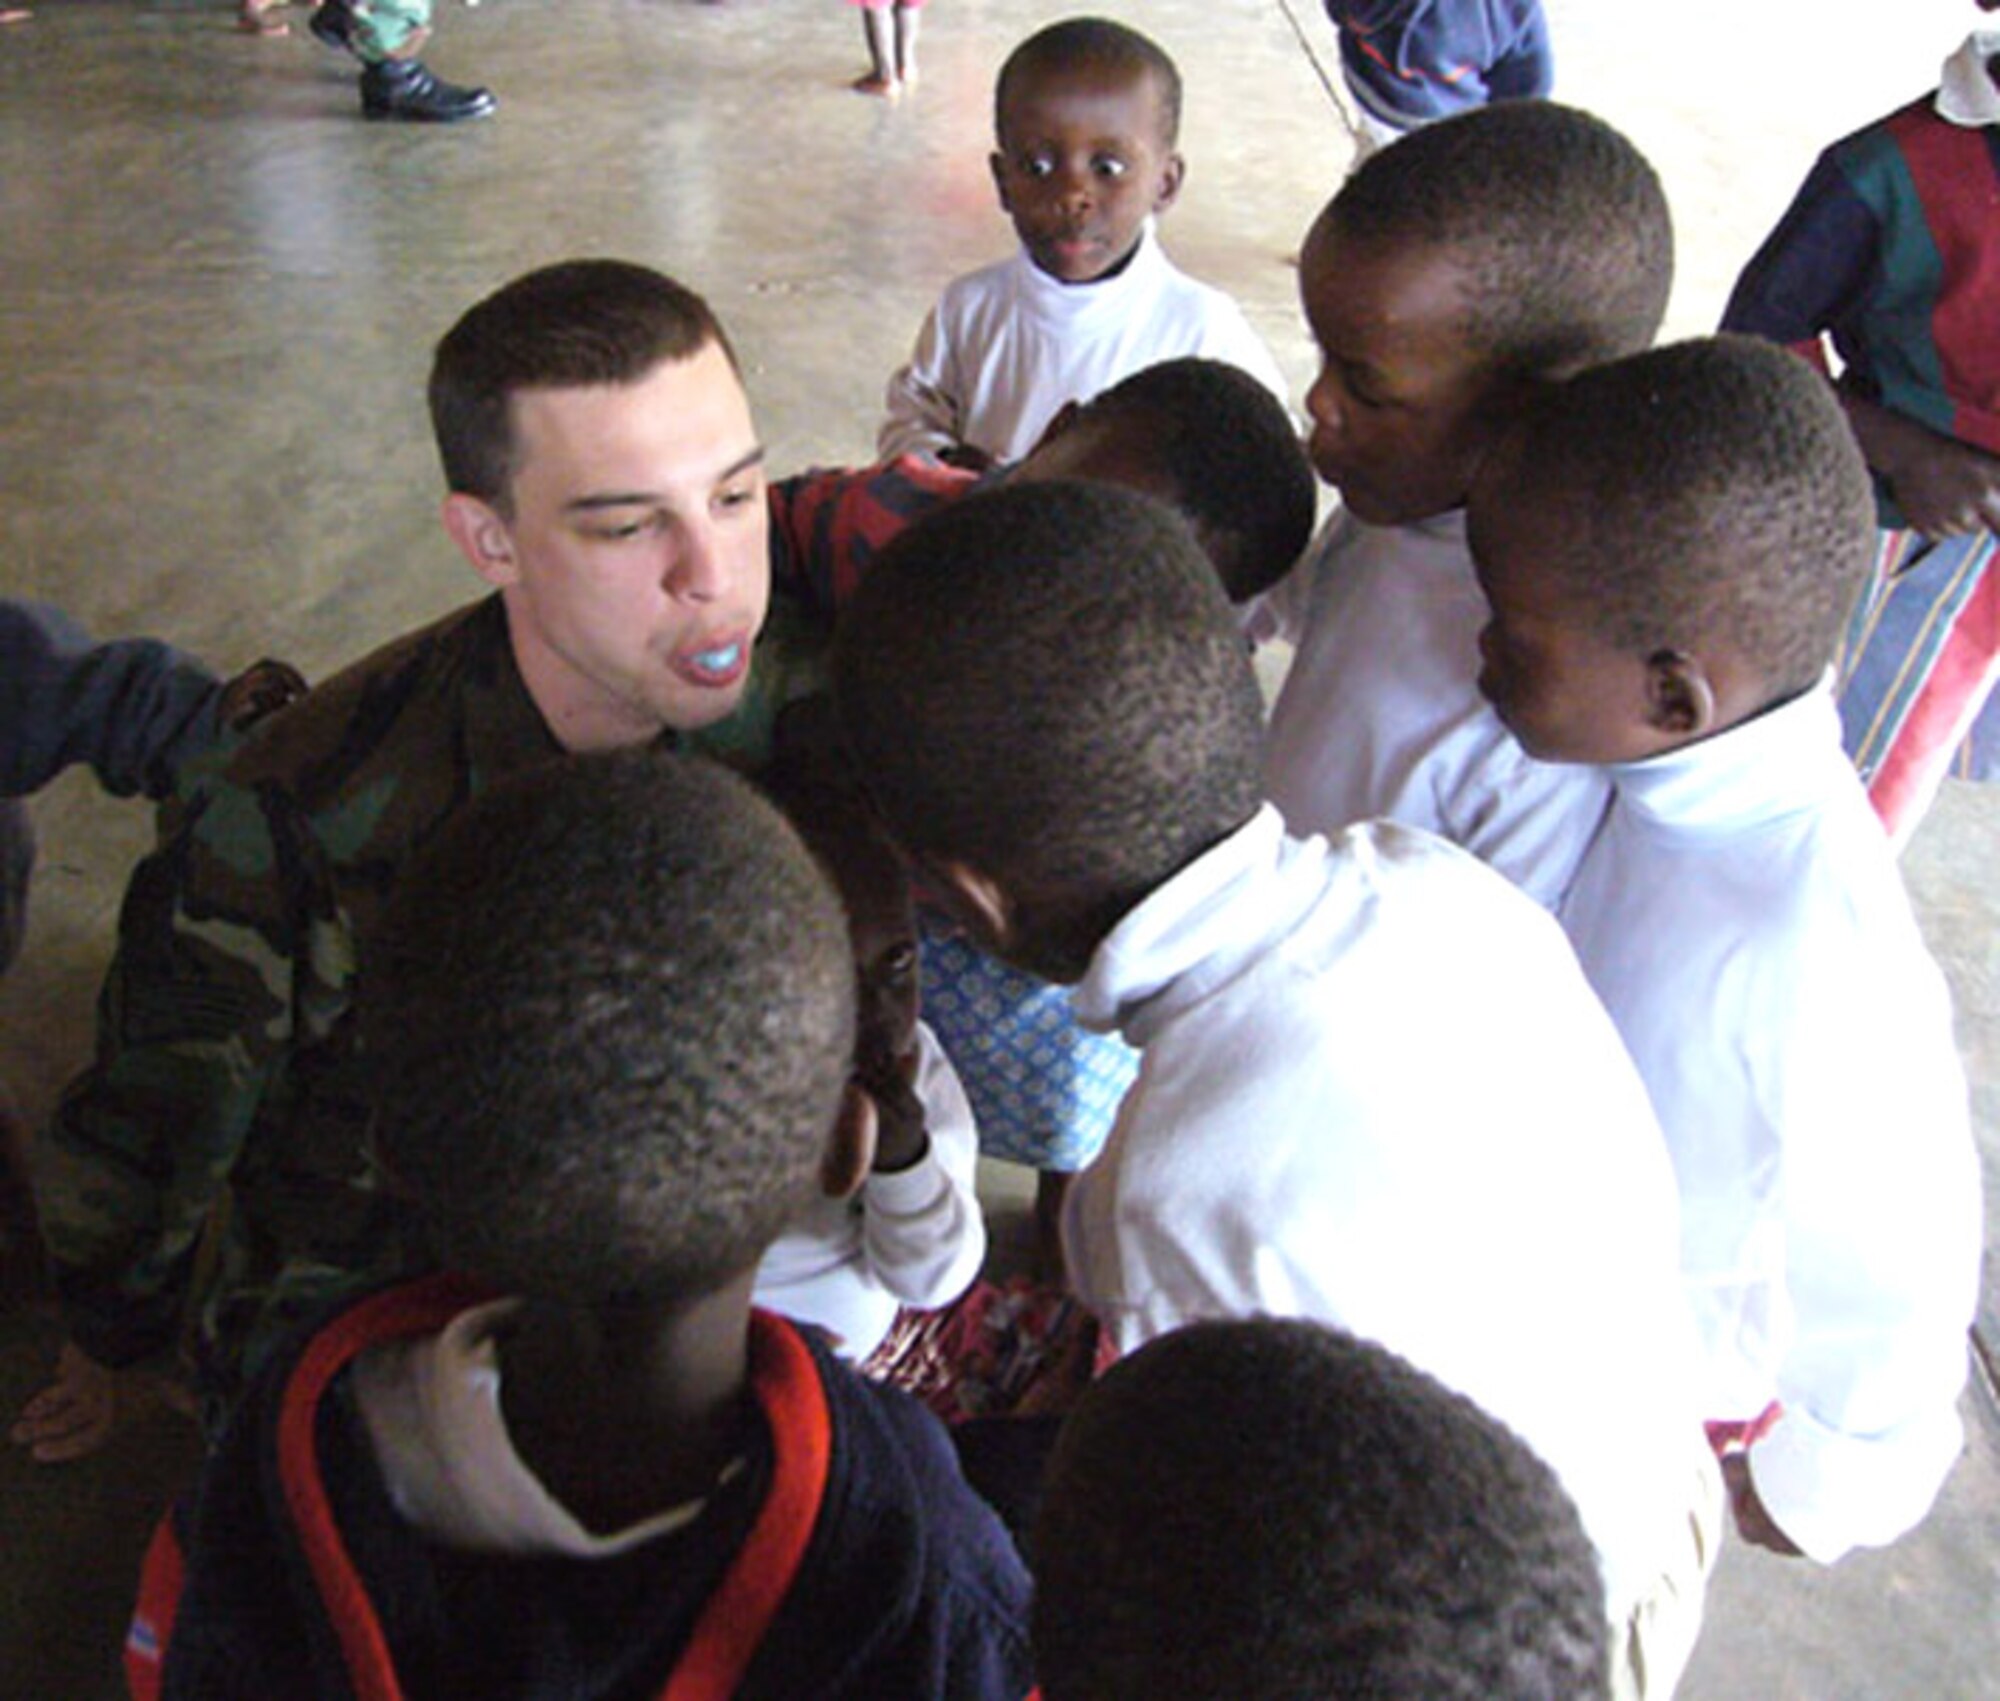 Staff Sgt. Jack Brown teaches Rwandan orphans how to blow a bubble with gum during a visit at an orphanage in Kigali. Airmen from Ramstein Air Base, Germany, delivered donations collected from the Kaiserslautern Military Community. Sergeant Brown is assigned to the 700th Contracting Squadron. (U.S. Air Force photo/Capt. Erin Dorrance)
